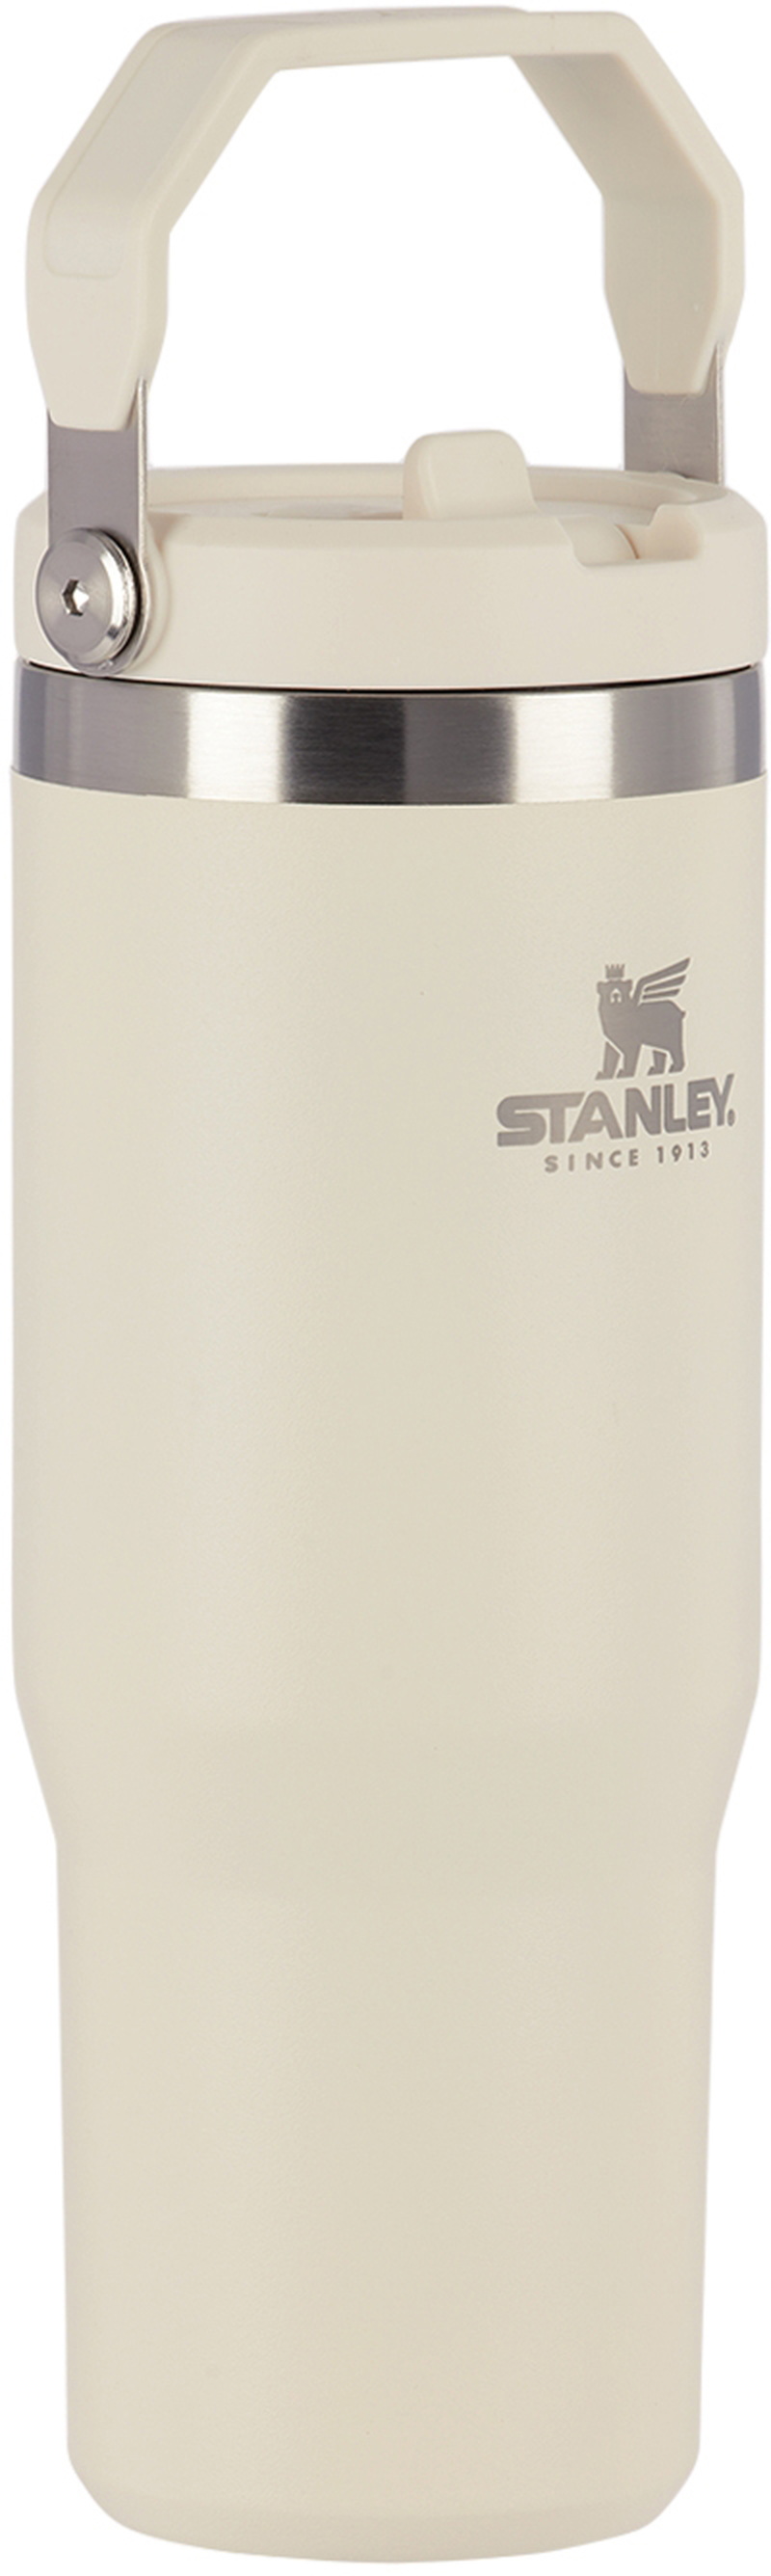 New 30oz Stanley IceFlow Stainless Steel Tumbler with handle